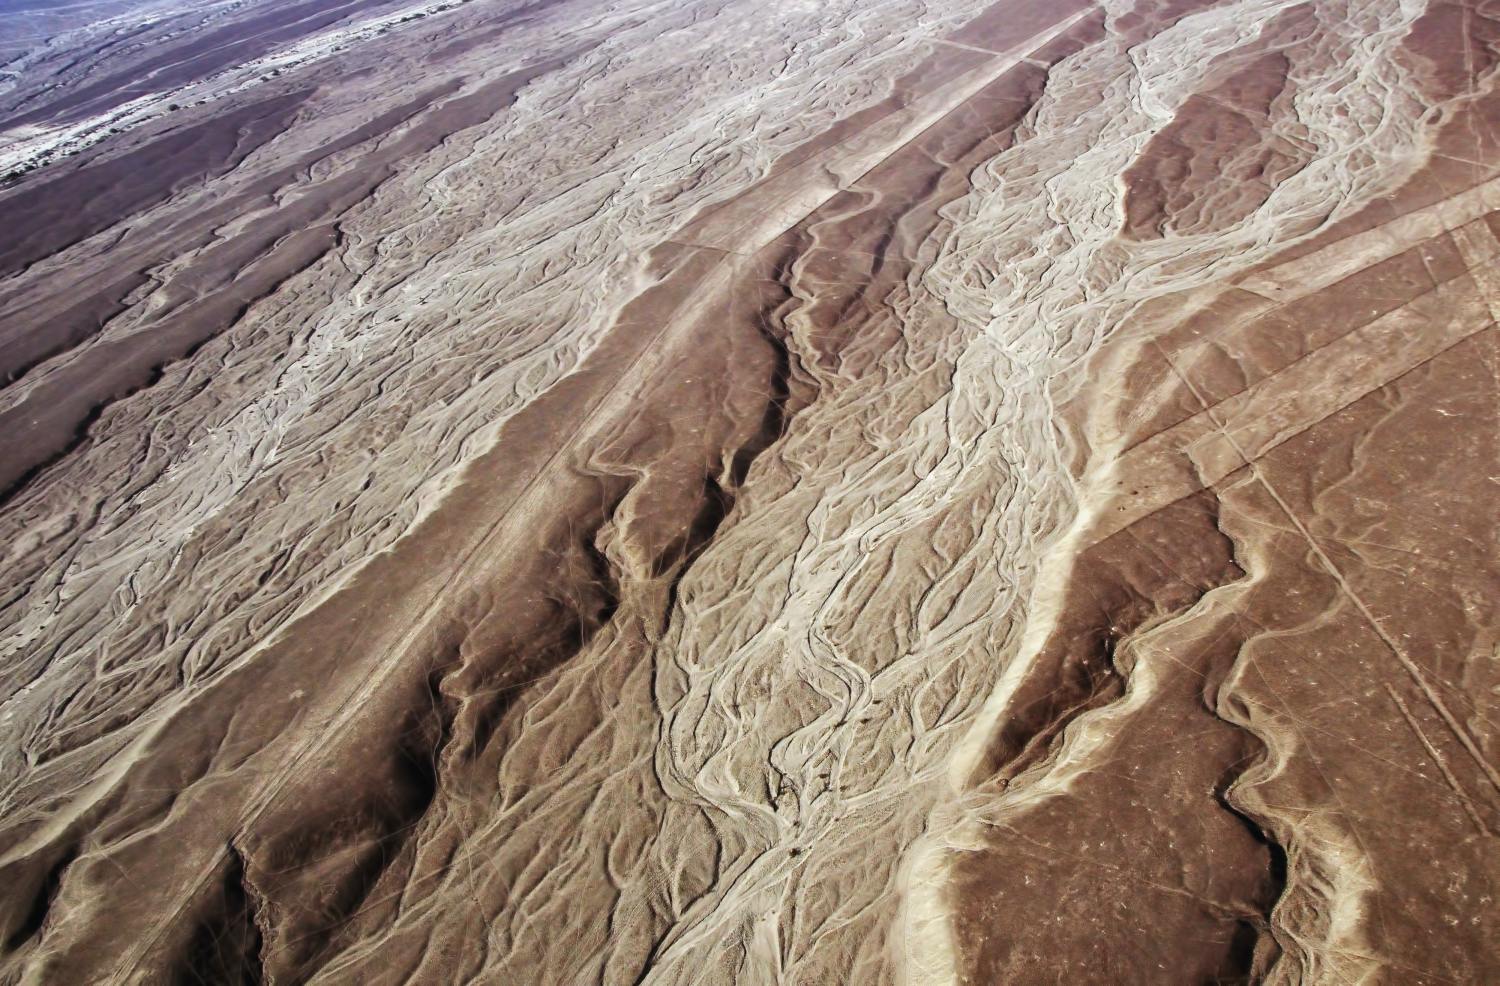 The Ancient Mystery Of Nazca Lines: Over 800 Straight Lines And 300 Geometric Figures